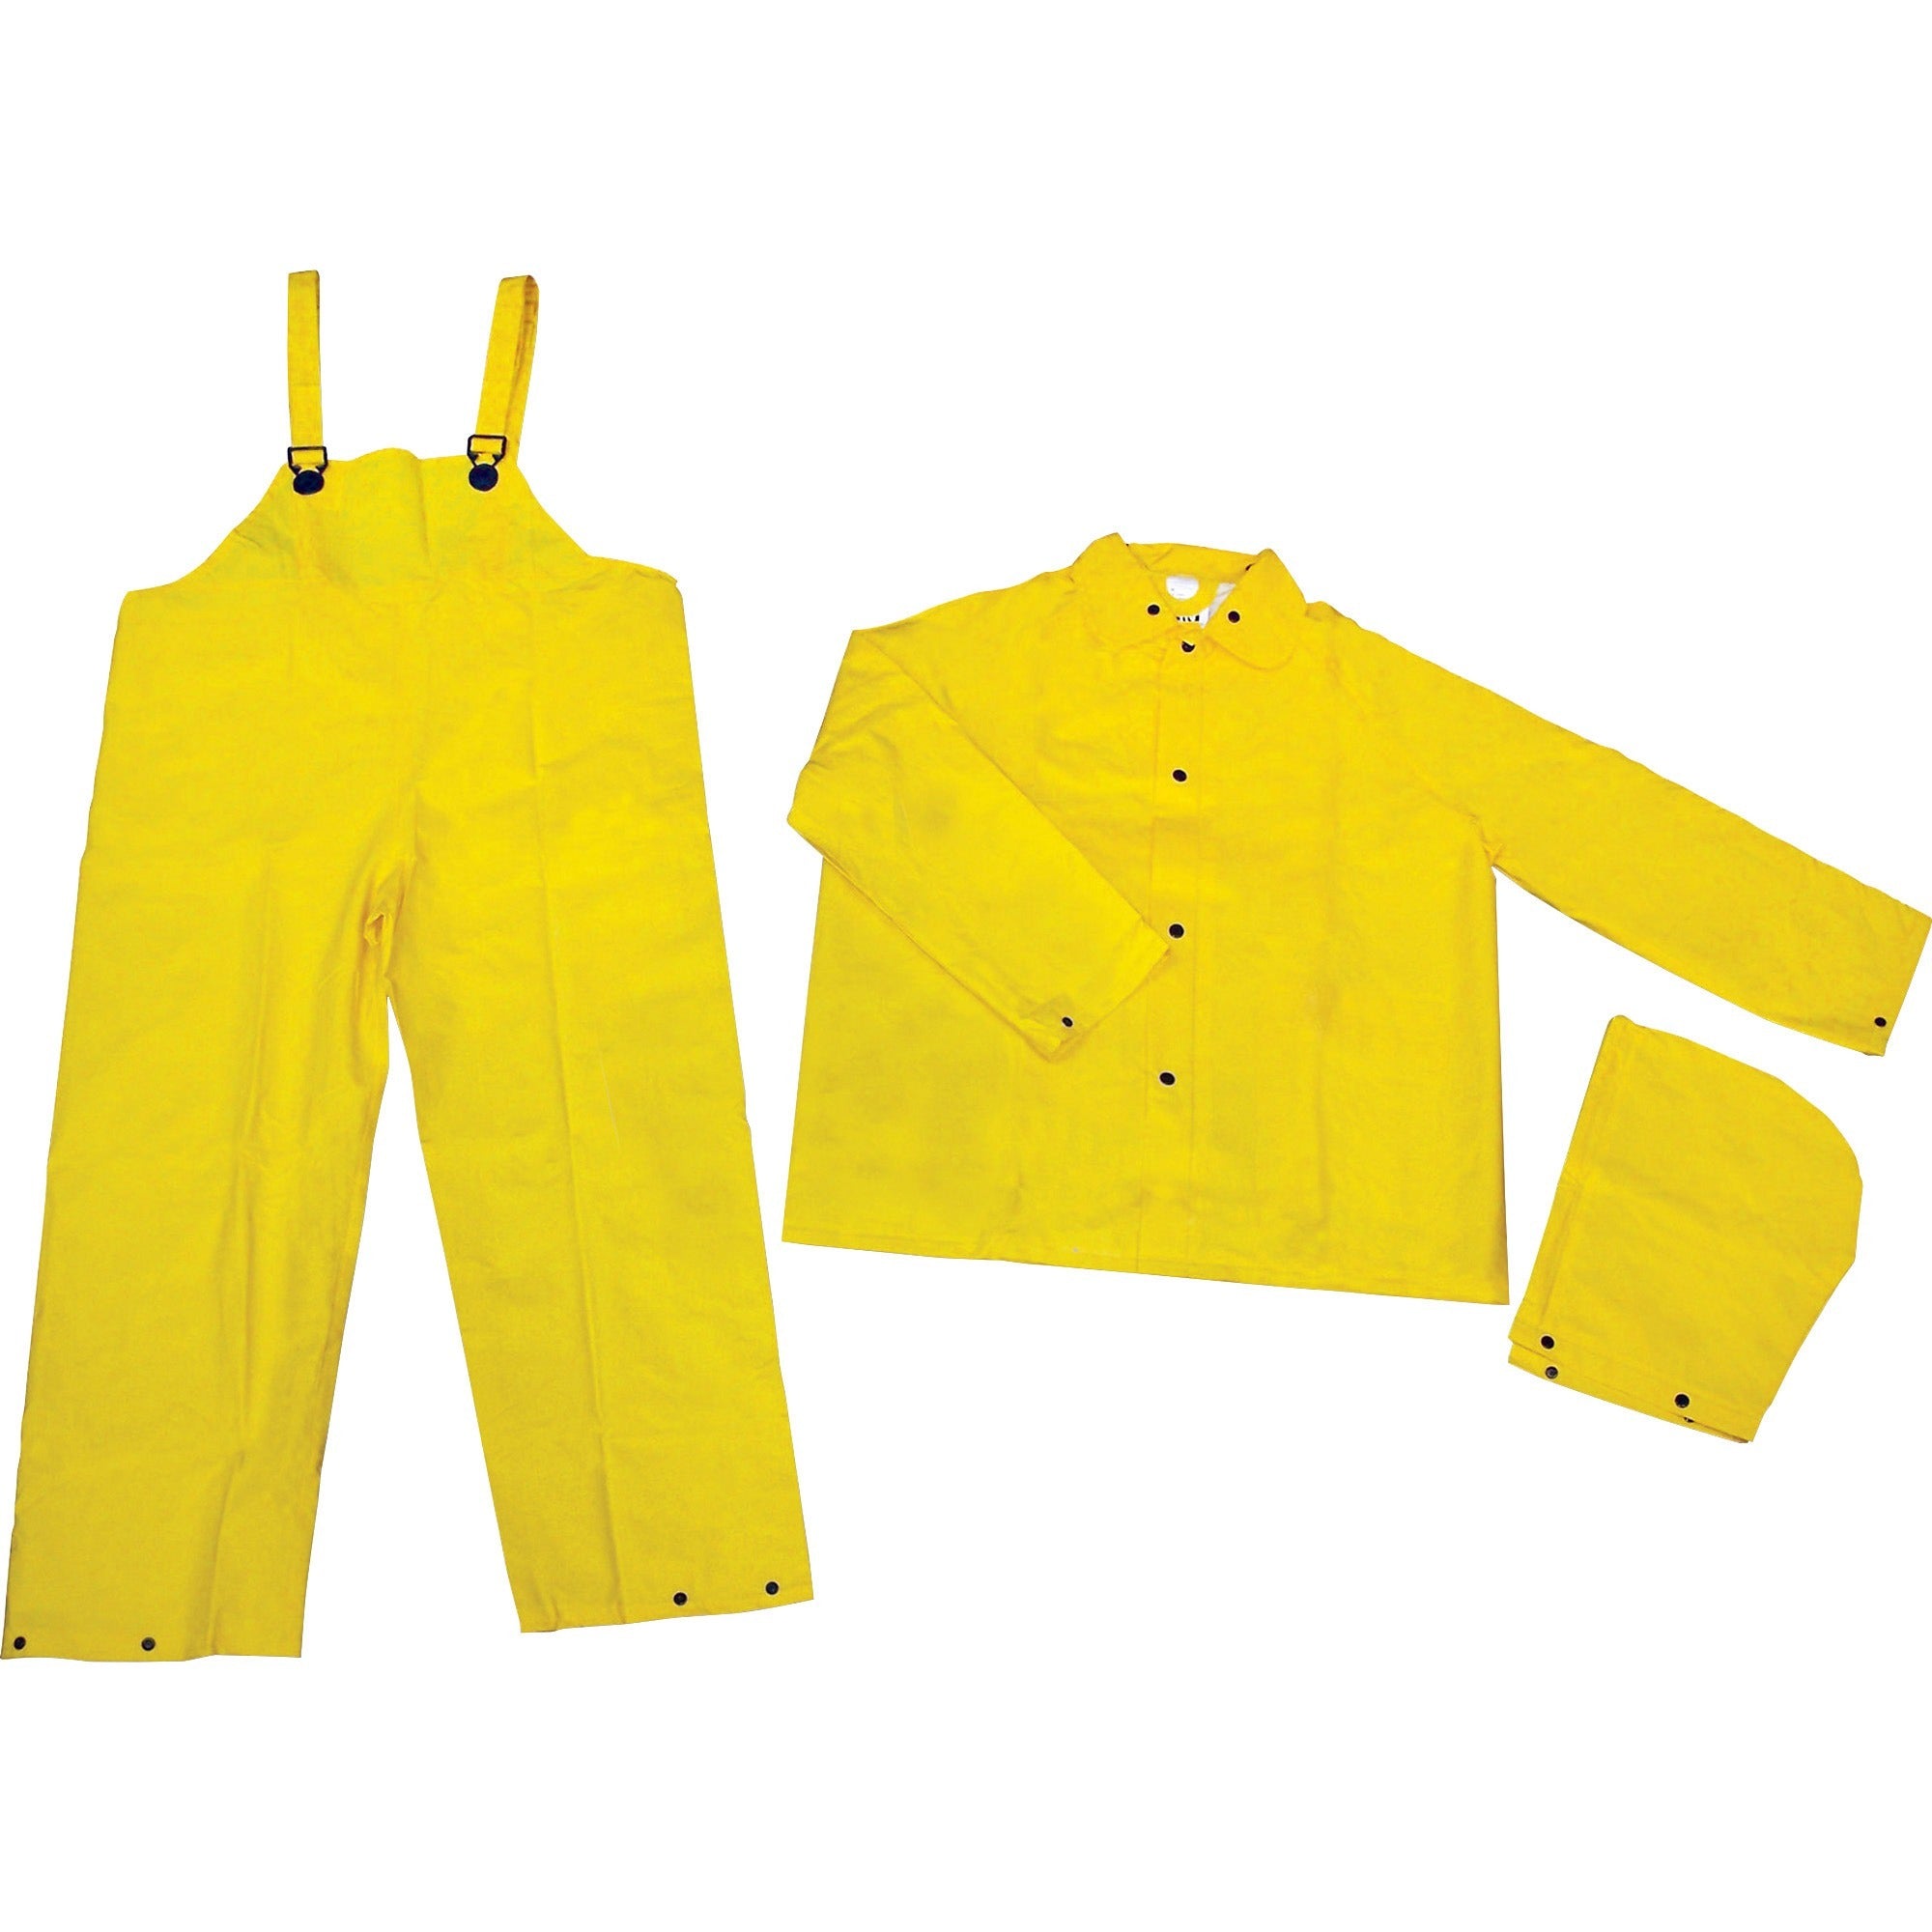 river-city-three-piece-rainsuit-recommended-for-agriculture-construction-transportation-sanitation-carpentry-landscaping-3-xtra-large-size-water-protection-snap-closure-polyester-polyvinyl-chloride-pvc-yellow-1-each_mcs2003x3 - 1